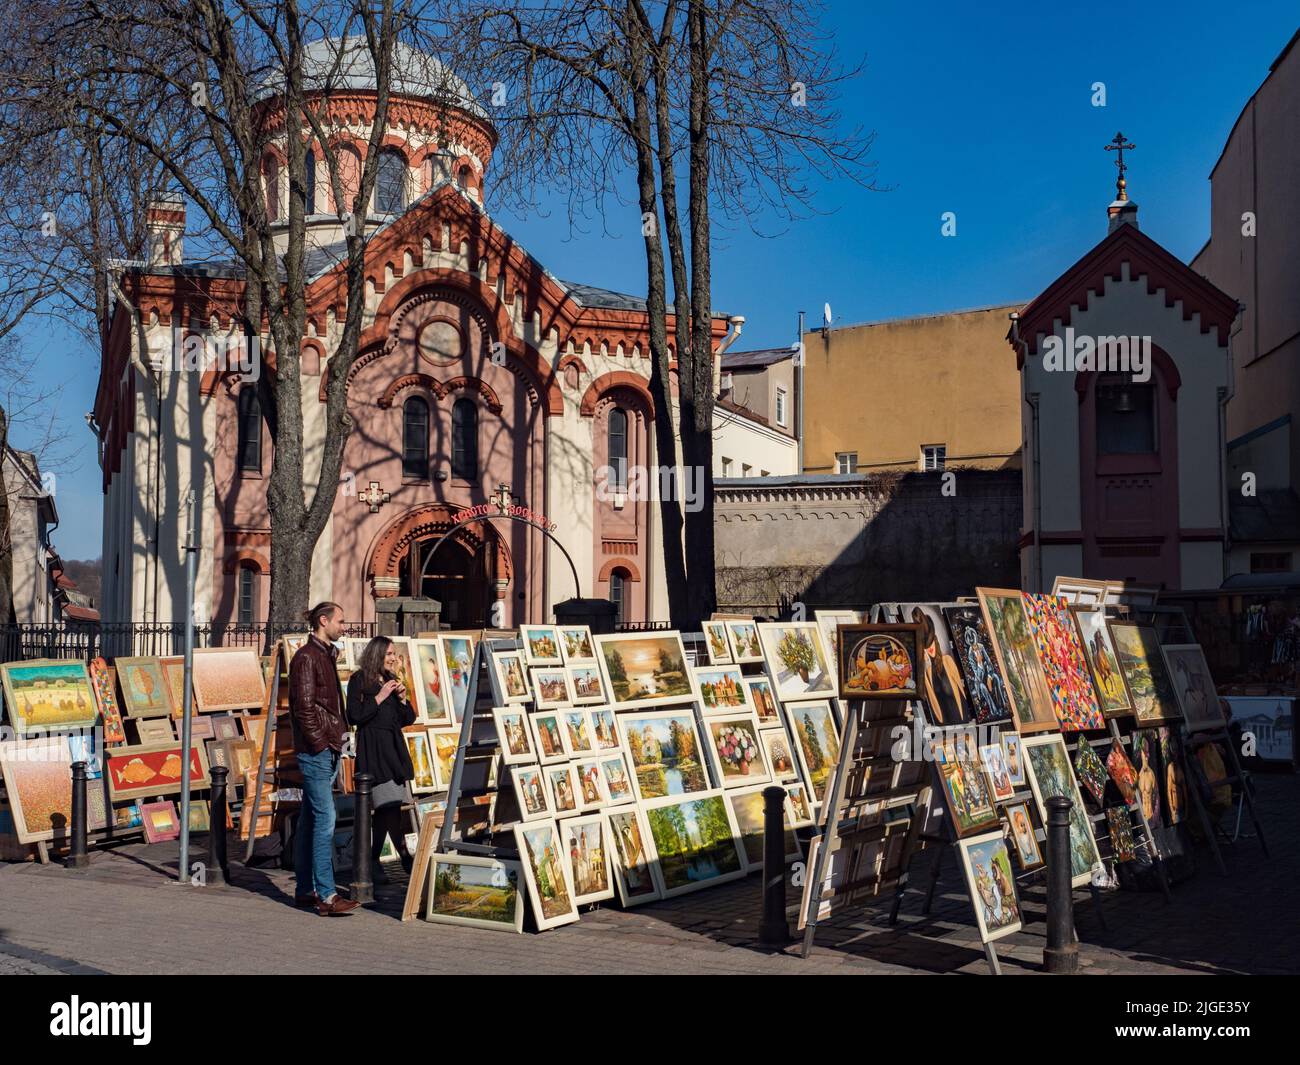 Vilnius, Lithuania - April 2018: Stands with paintings sold by artists on the street  near Eastern Orthodox Church of St. Paraskeva,  Eastern. Europe Stock Photo